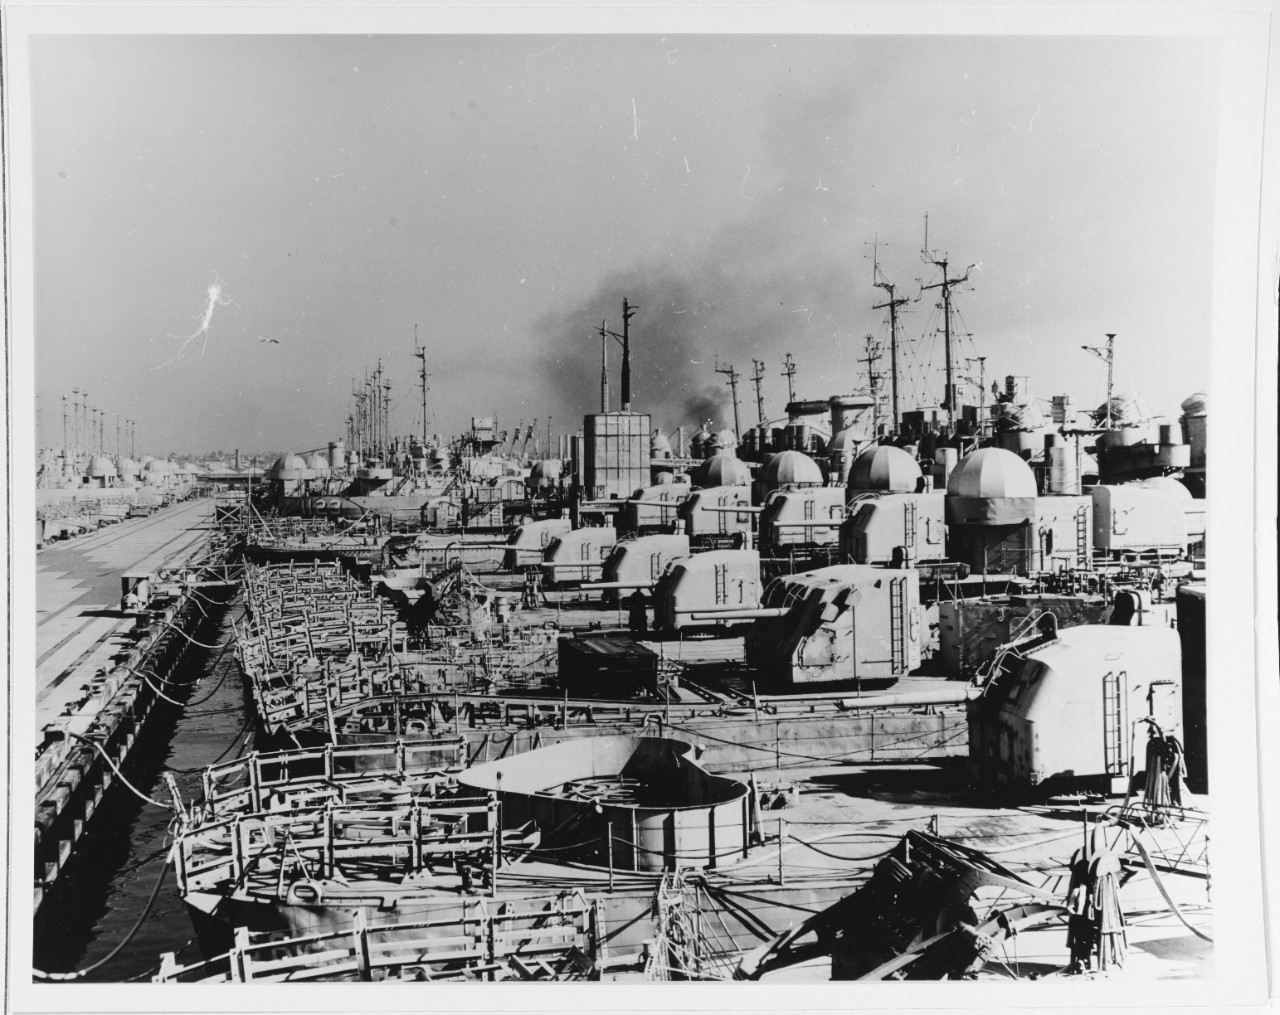 Reserve fleet ships berthed at San Diego, California.